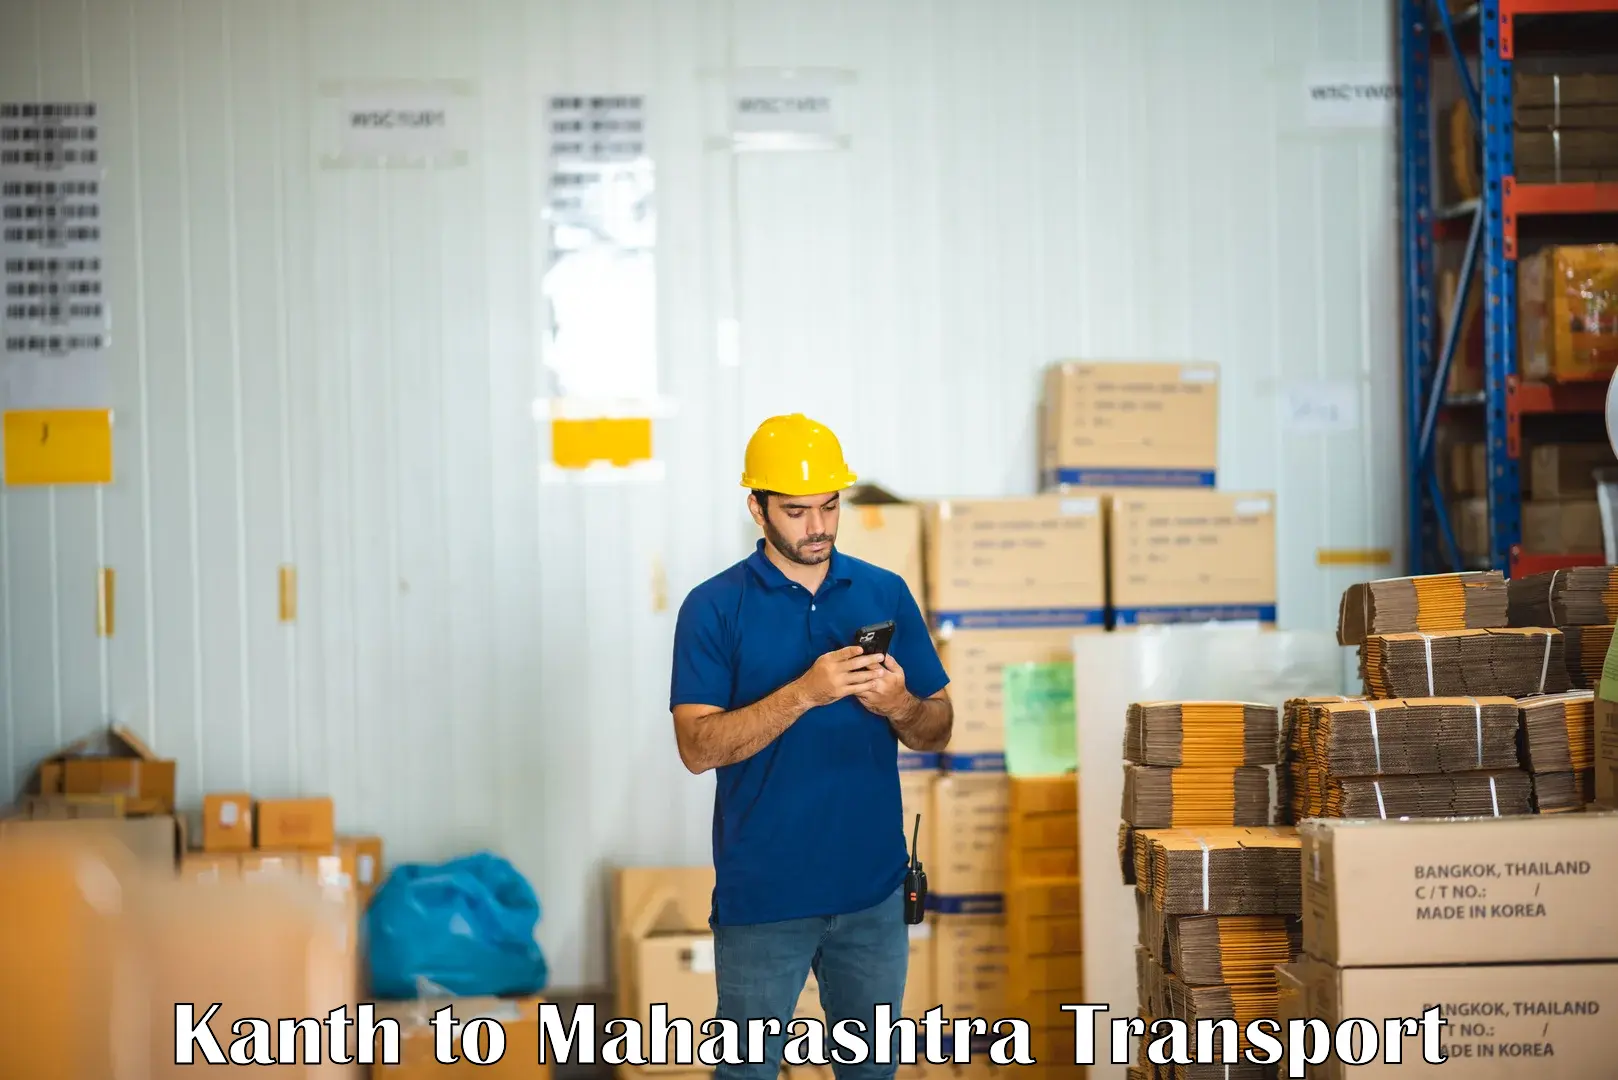 Daily parcel service transport in Kanth to Mahabaleshwar